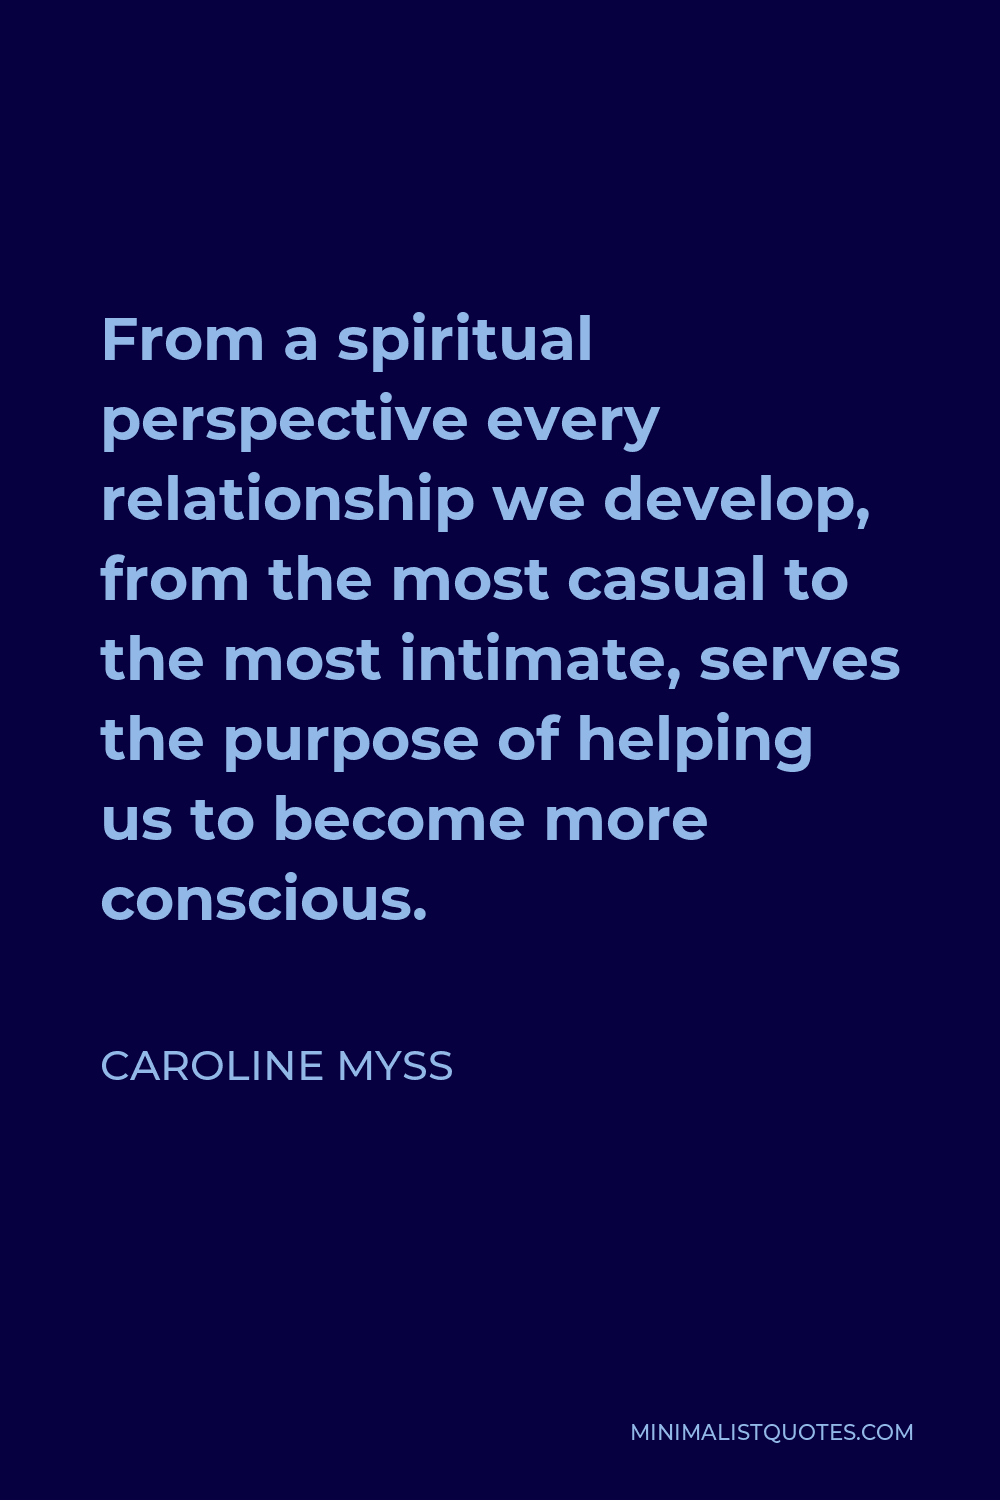 Caroline Myss Quote - From a spiritual perspective every relationship we develop, from the most casual to the most intimate, serves the purpose of helping us to become more conscious.